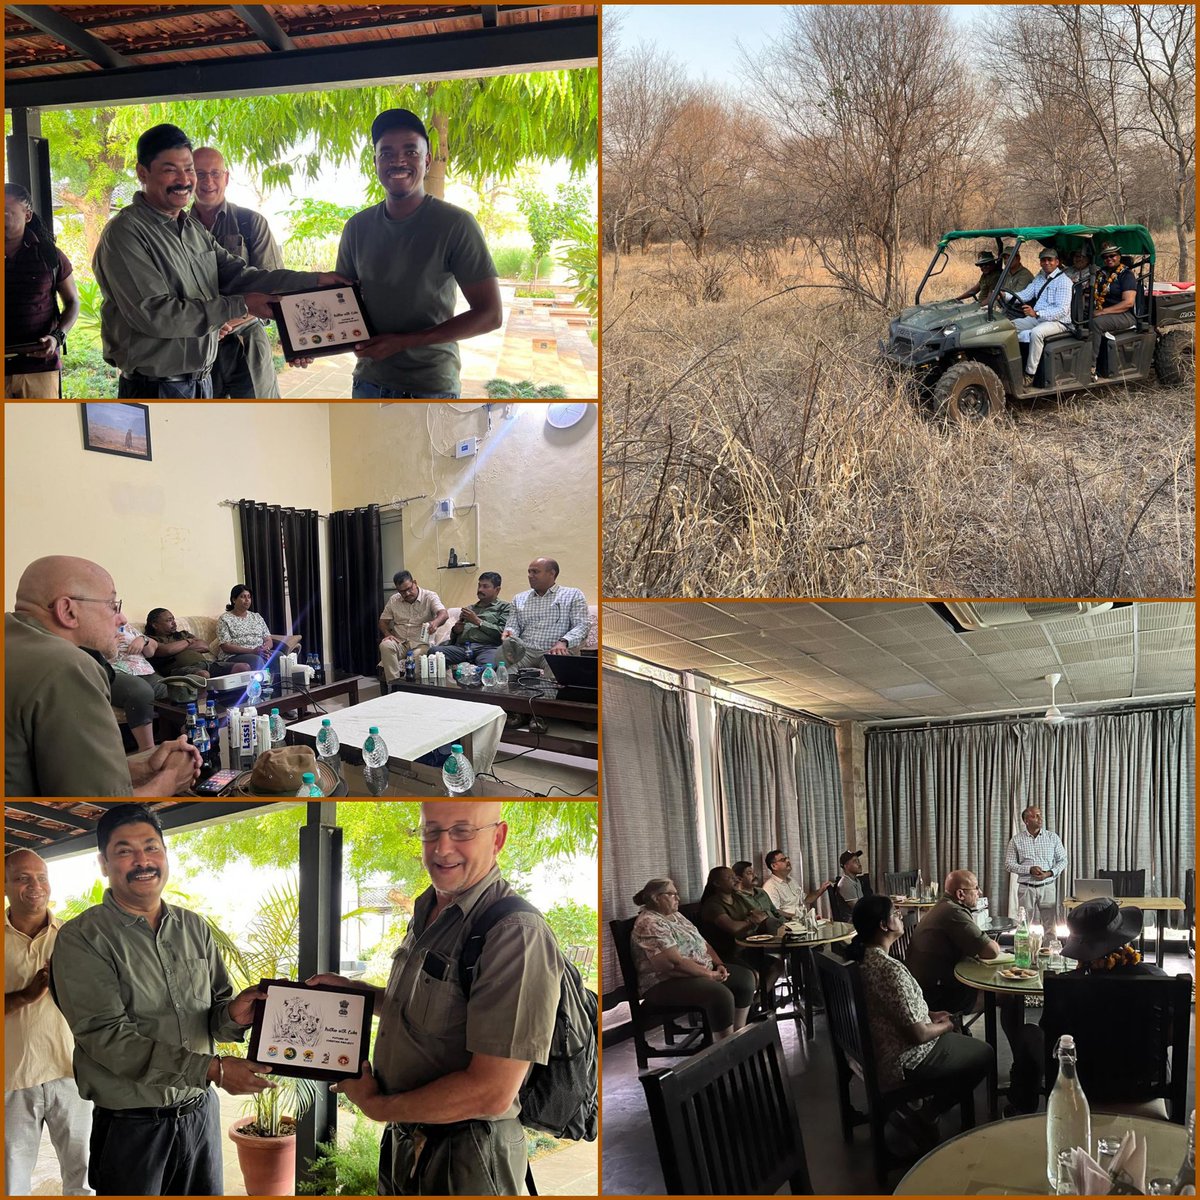 As part of the ongoing visit of officials from South Africa, an appraisal of Project Cheetah at Kuno, Madhya Pradesh was undertaken comprising field visits and interactive sessions.